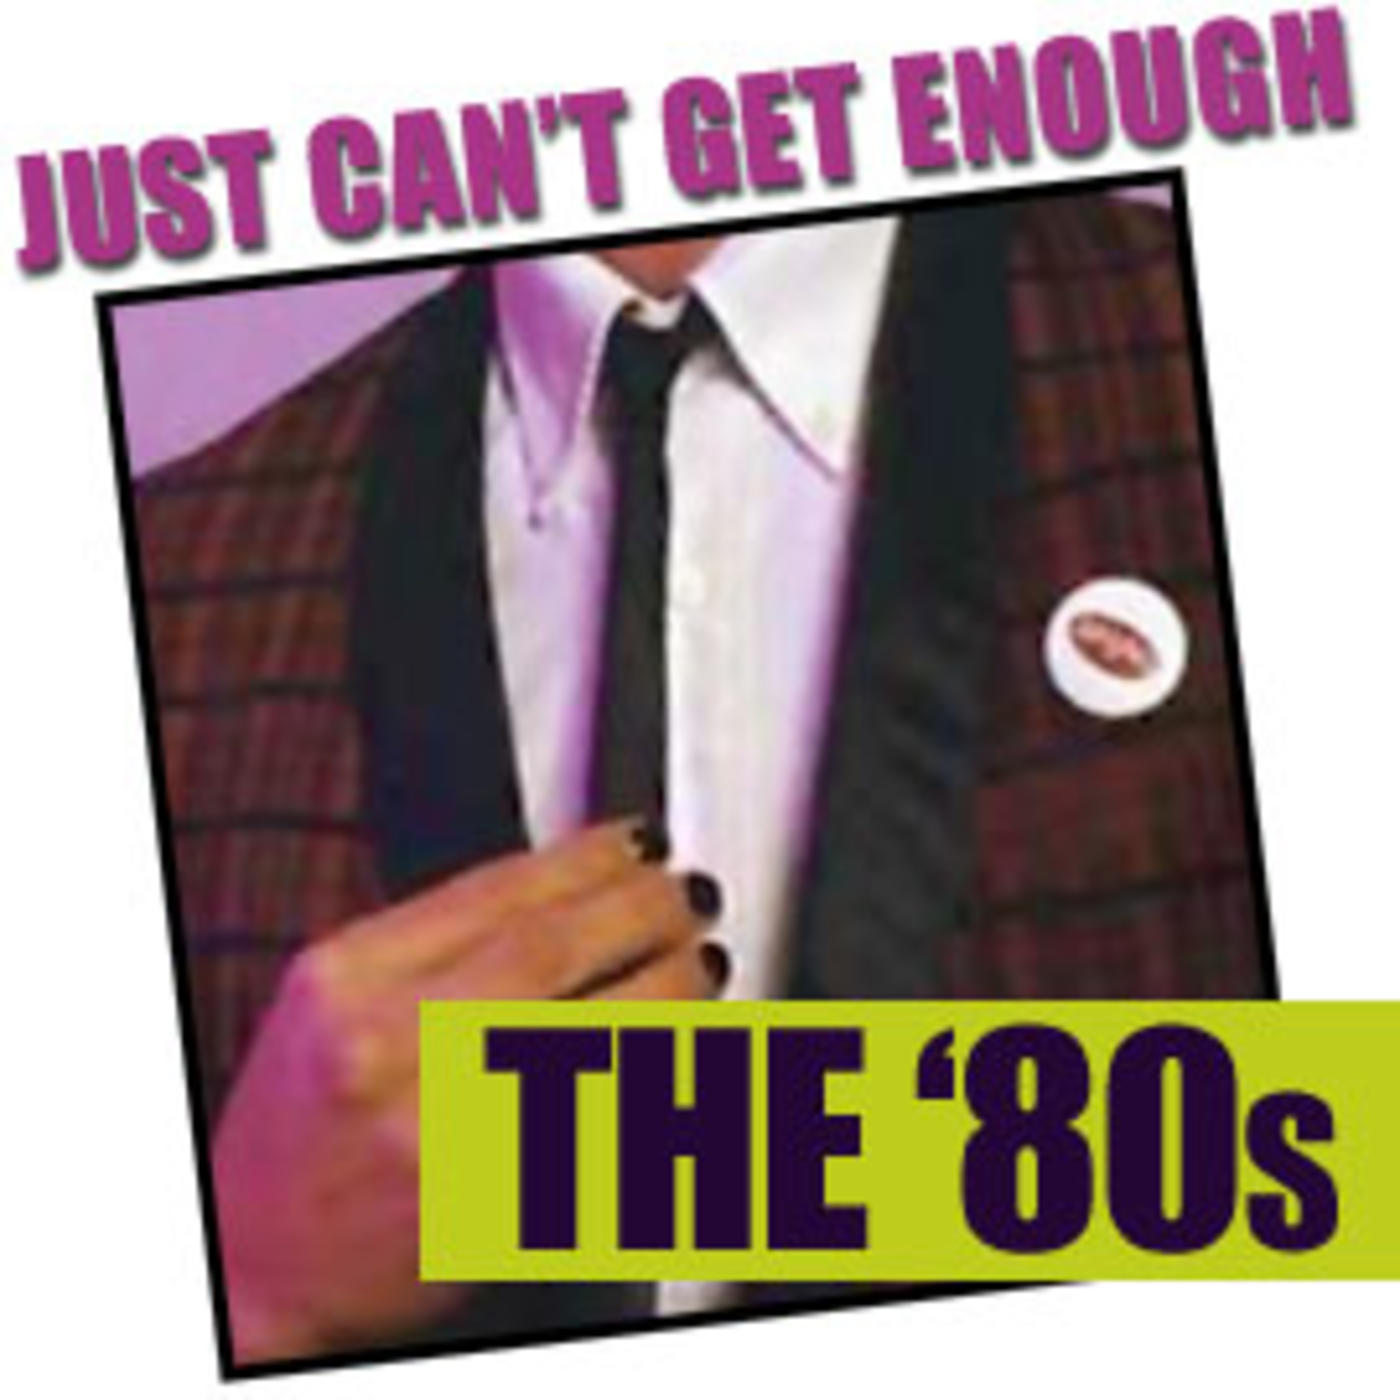 Just Can't Get Enough - The 80s - Presented By Slicing Up Eyeballs - Big Audio Dynamite, Talking Heads, Lords Of The New Church, Iggy Pop, Siouxsie And The Banshees, Pet Shop Boys